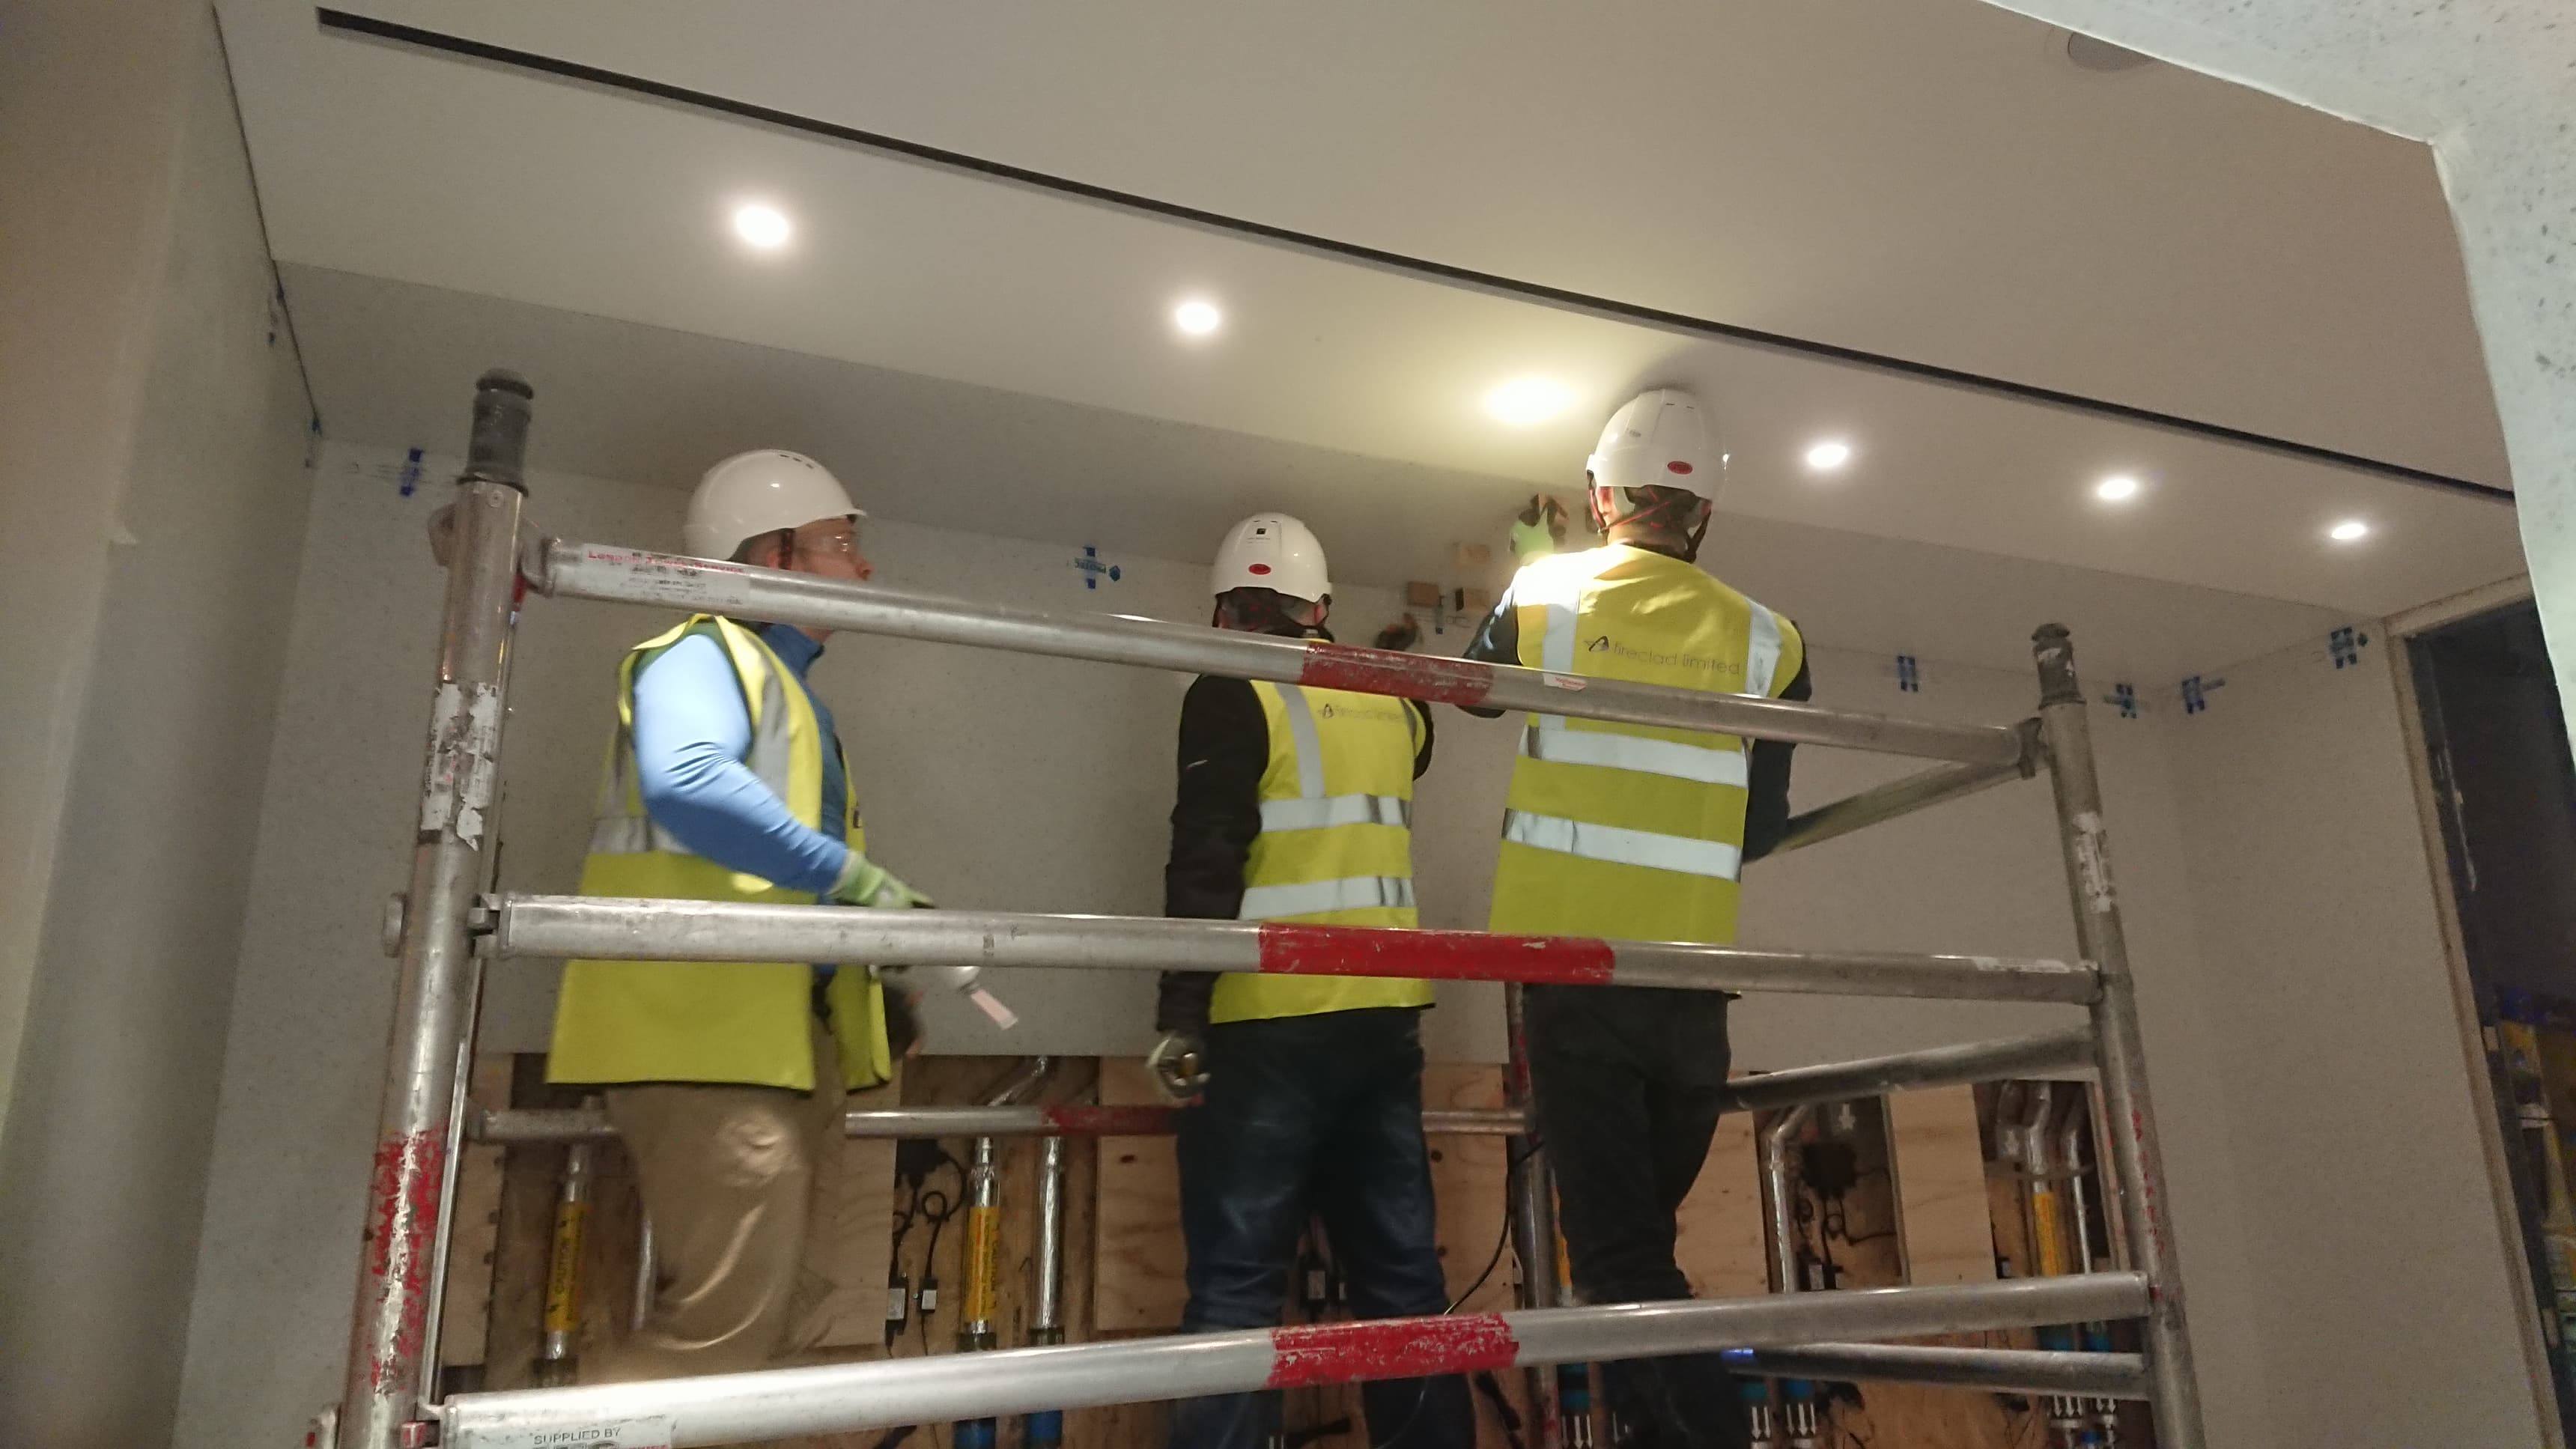 Plumtree Court, Shoe Lane, Central London, EC4 - Skilled Corian fitters 13